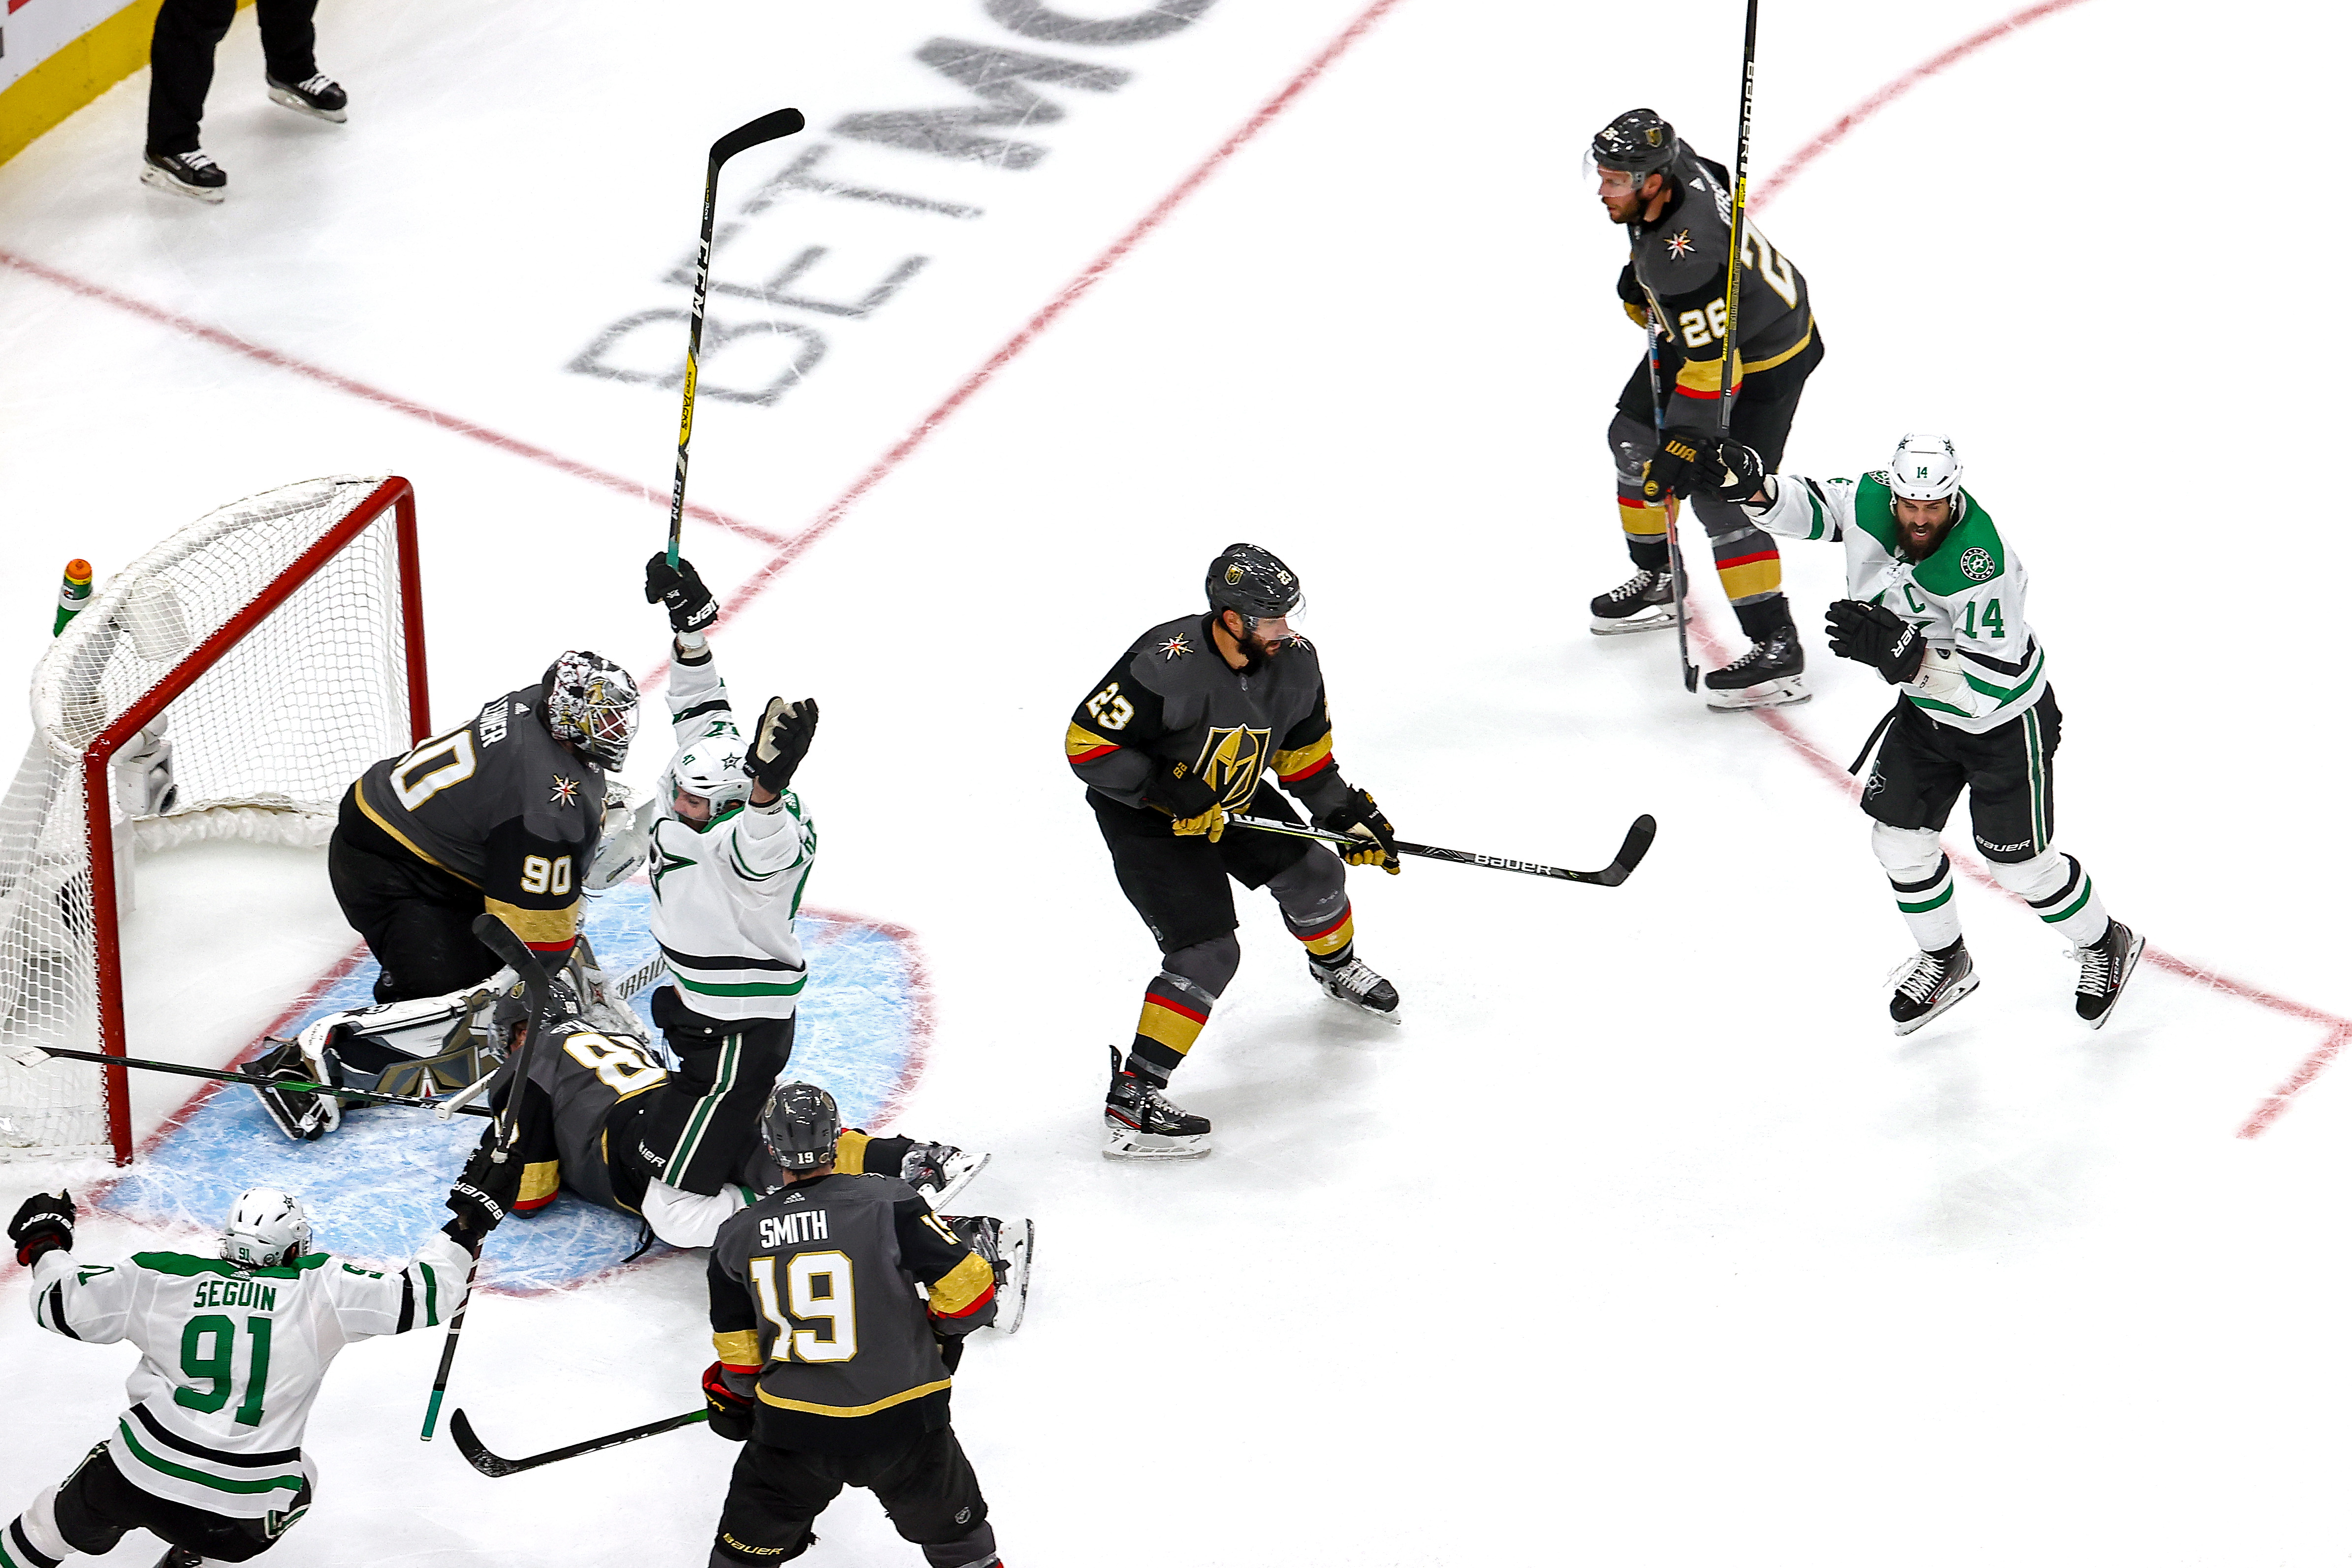 Dallas Stars Advance After Game 7 Win, Head to Western Conference